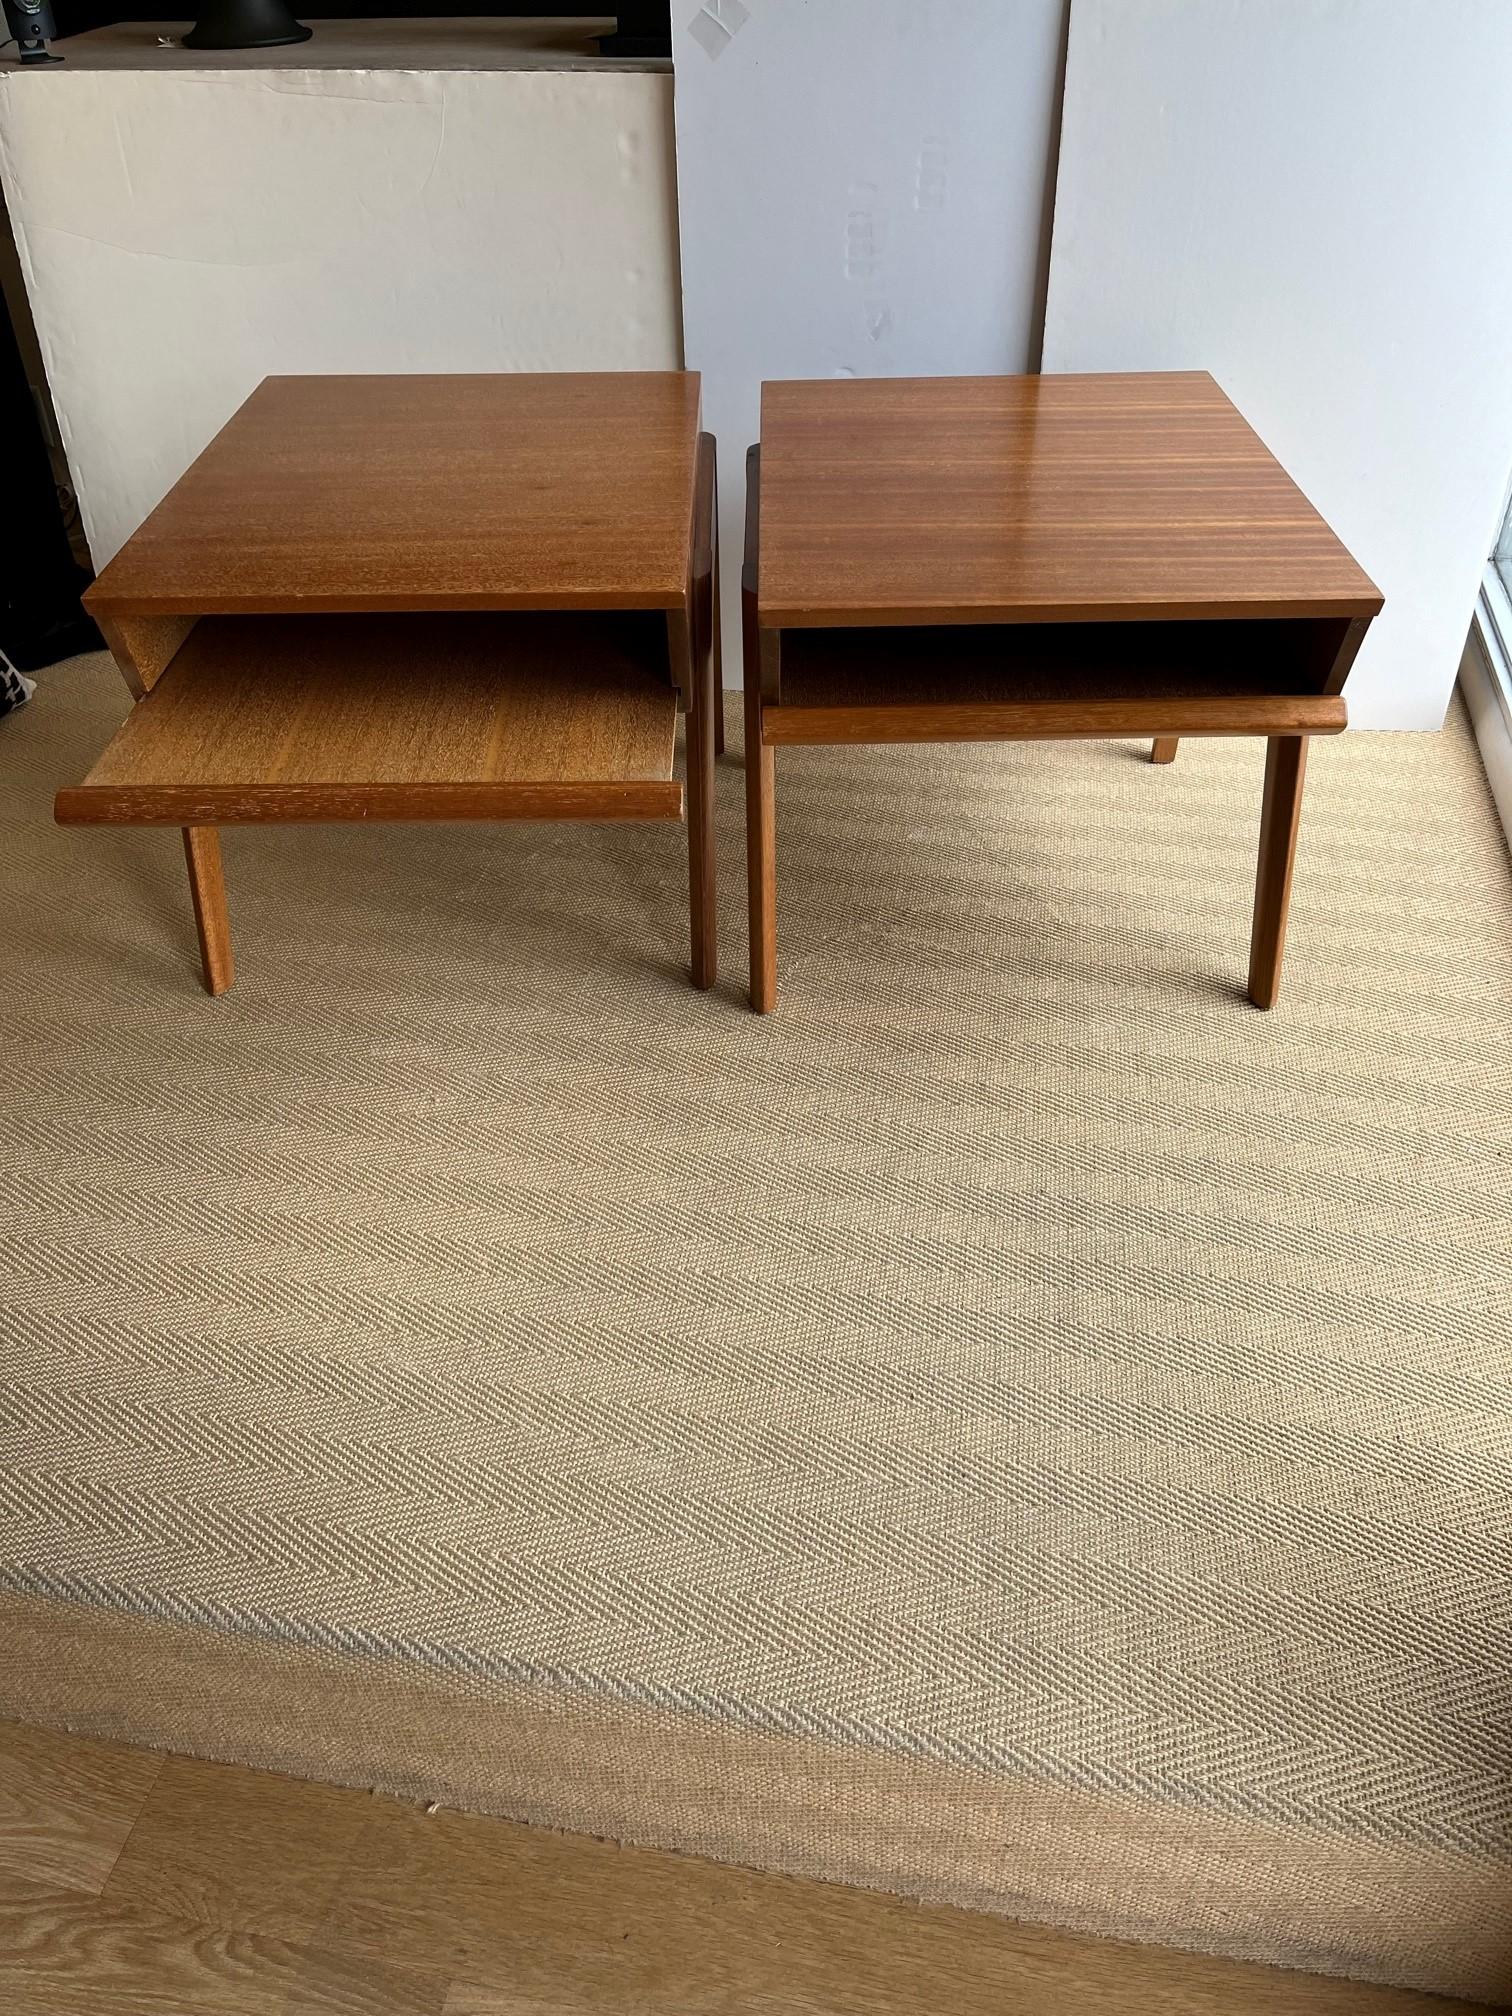 Pair of Mid-Century Modern Tray Side Table Designed by John Keal  For Sale 2